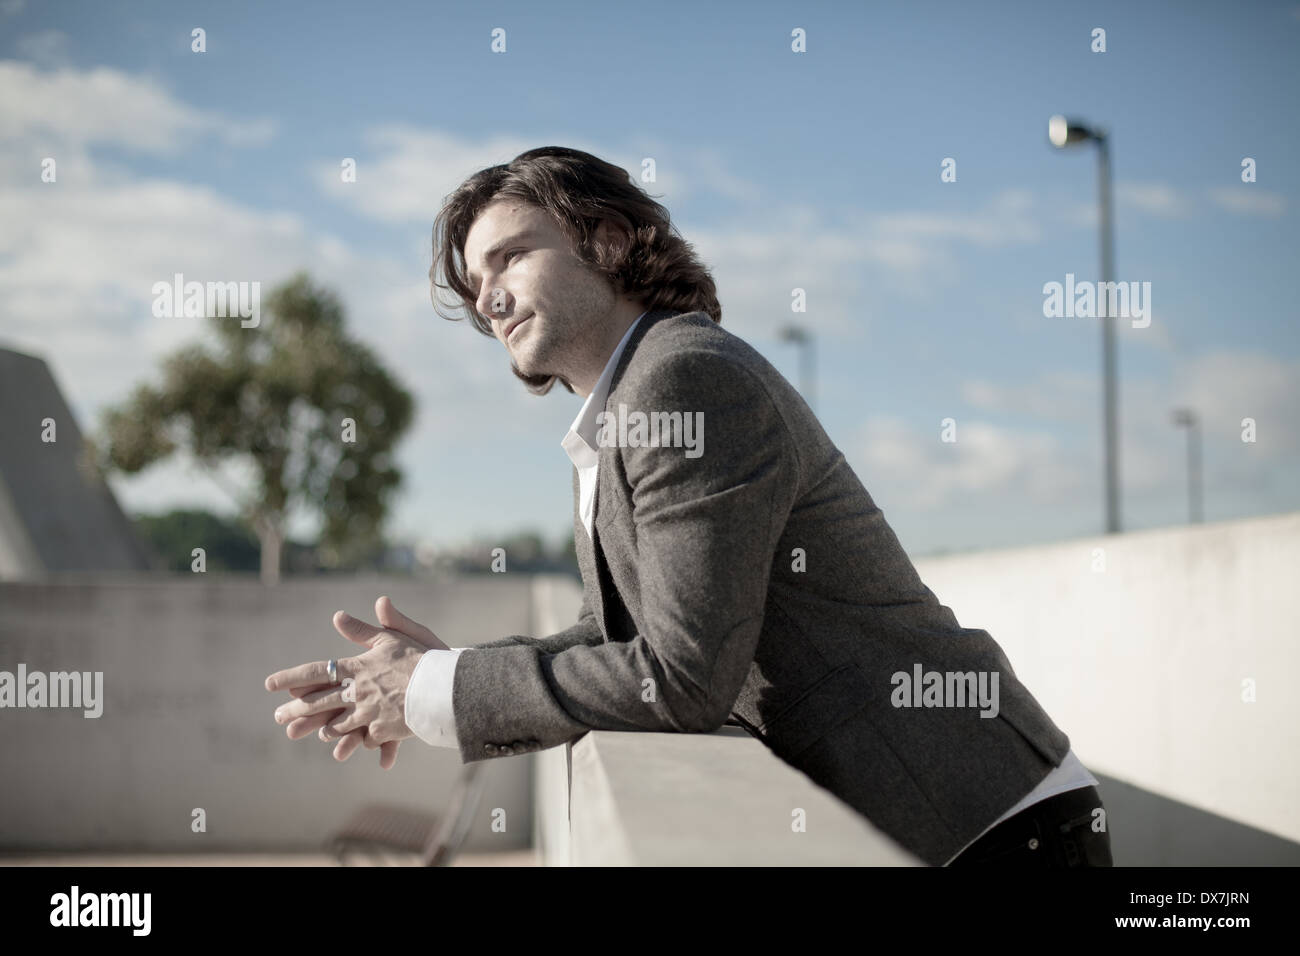 A young male model leaning against a wall with a blue sky behind him Stock Photo